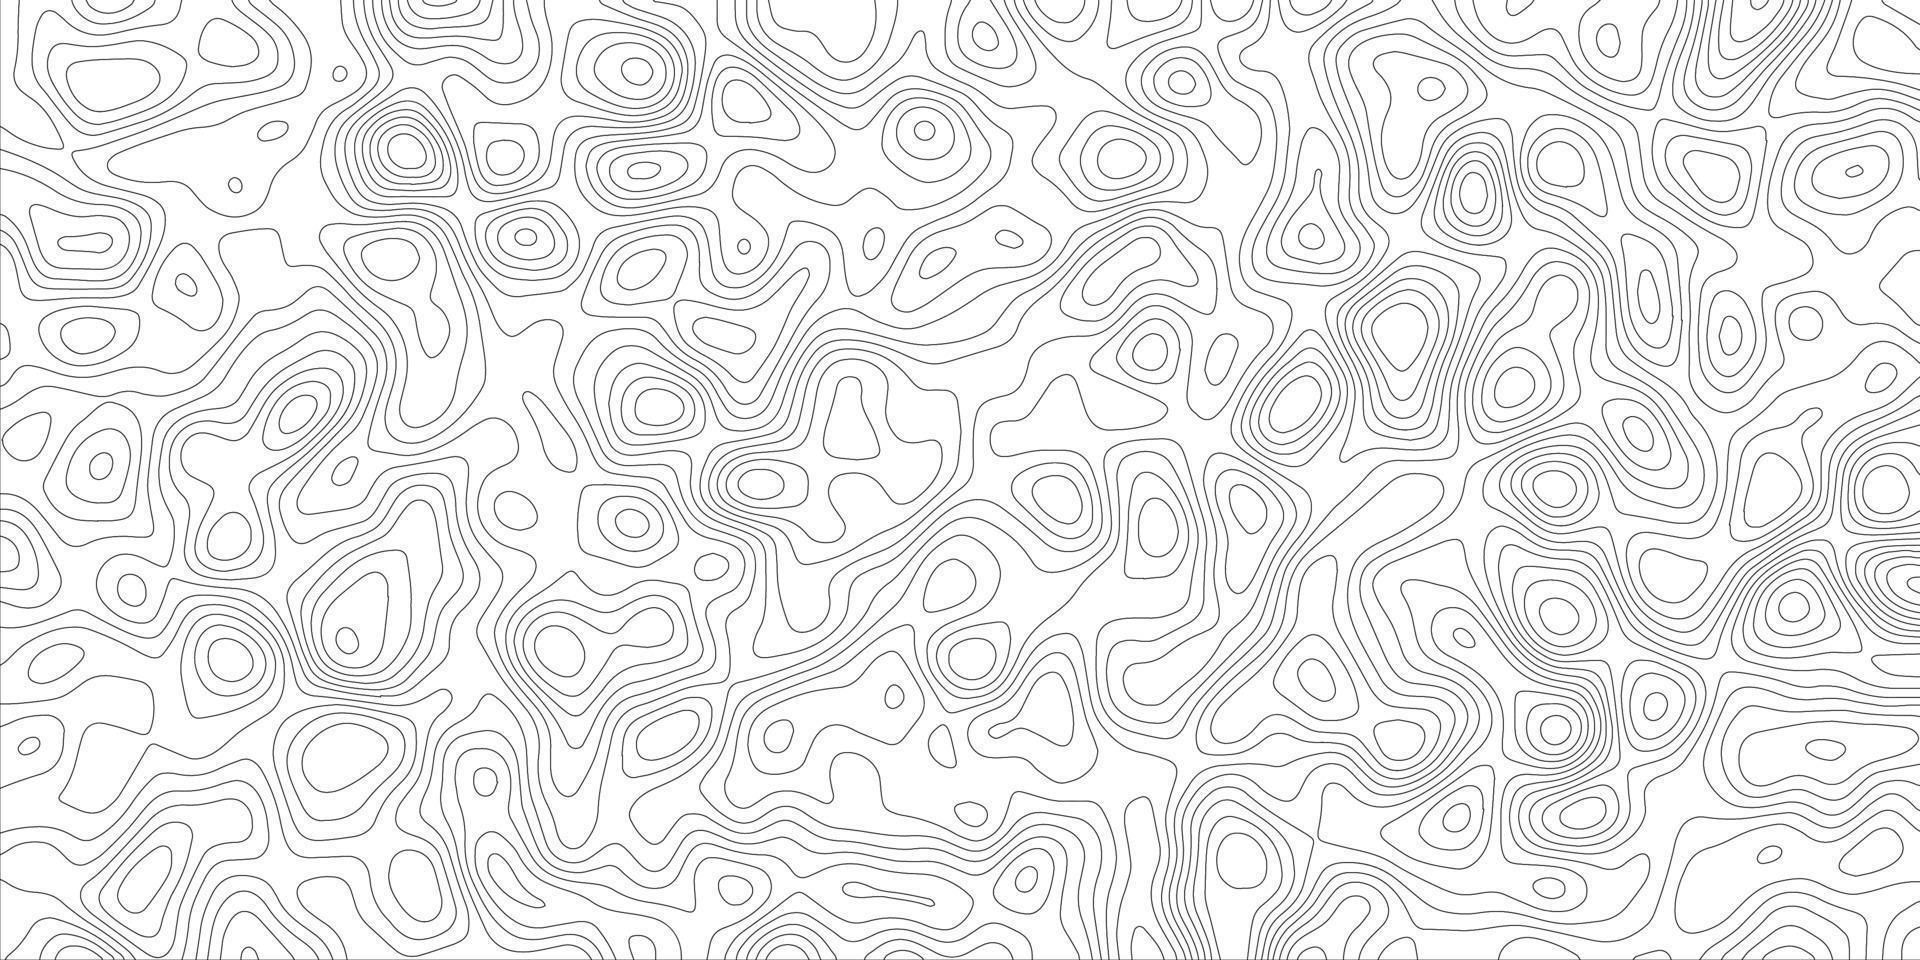 Topographic map lines background, geographic abstract grid, vector illustration